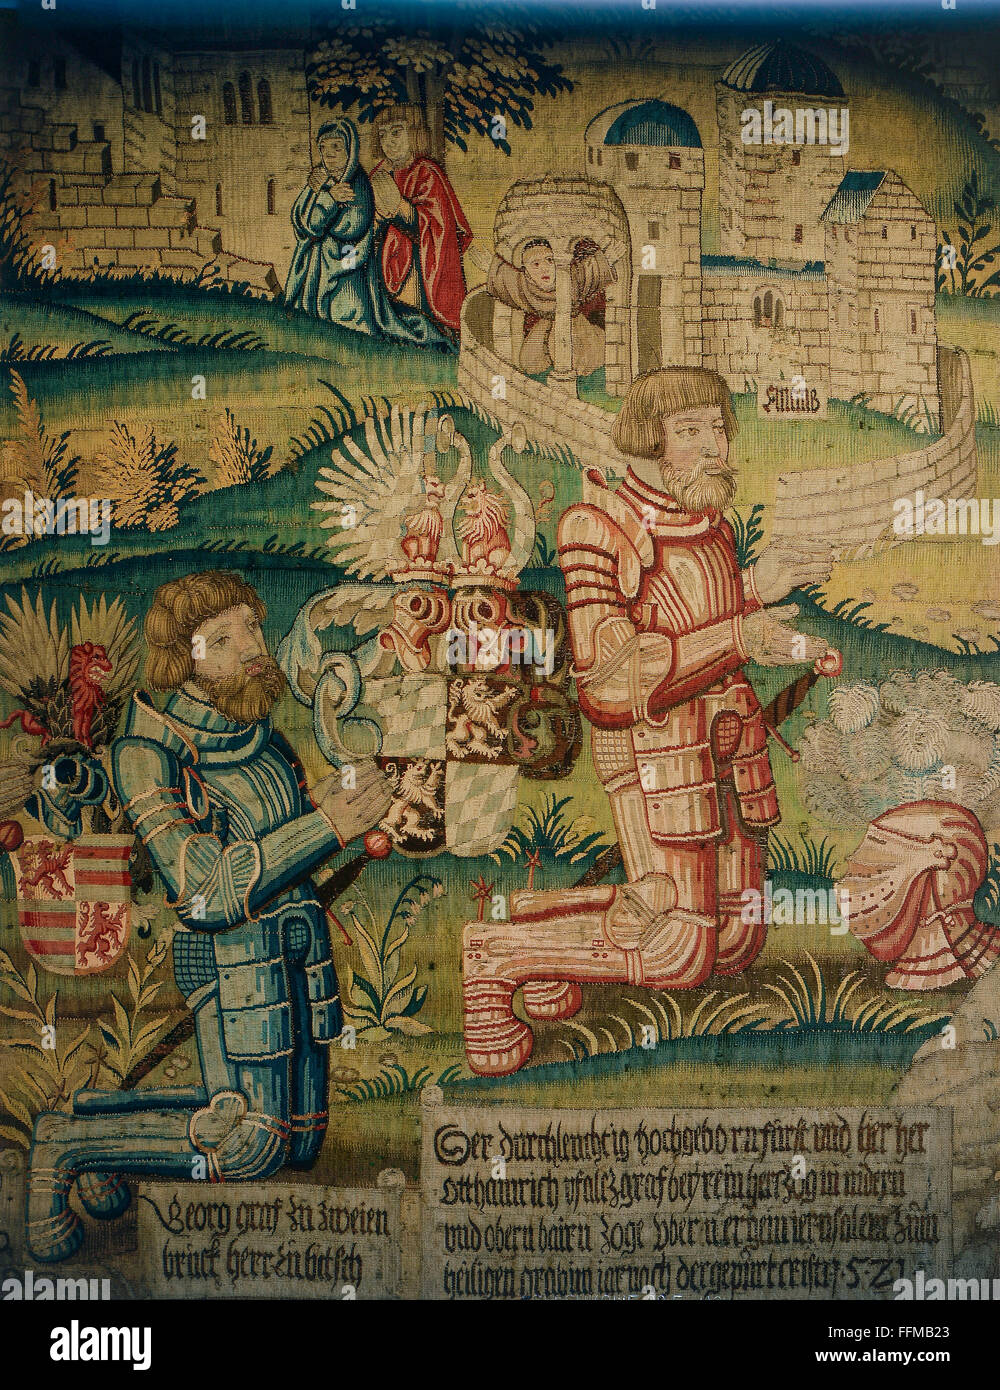 Otto Henry of the Palatinate, 10.4.1502 - 12.2.1559, Elector of the Palatinate 1556 - 1559, with Georg Count of Zweienbruck, on pilgrimage to Jerusalem, tapestry, after design by Matthias Gerung, detail, Bruxelles, 1541, Bavarian National Museum, Munich, Germany, Stock Photo